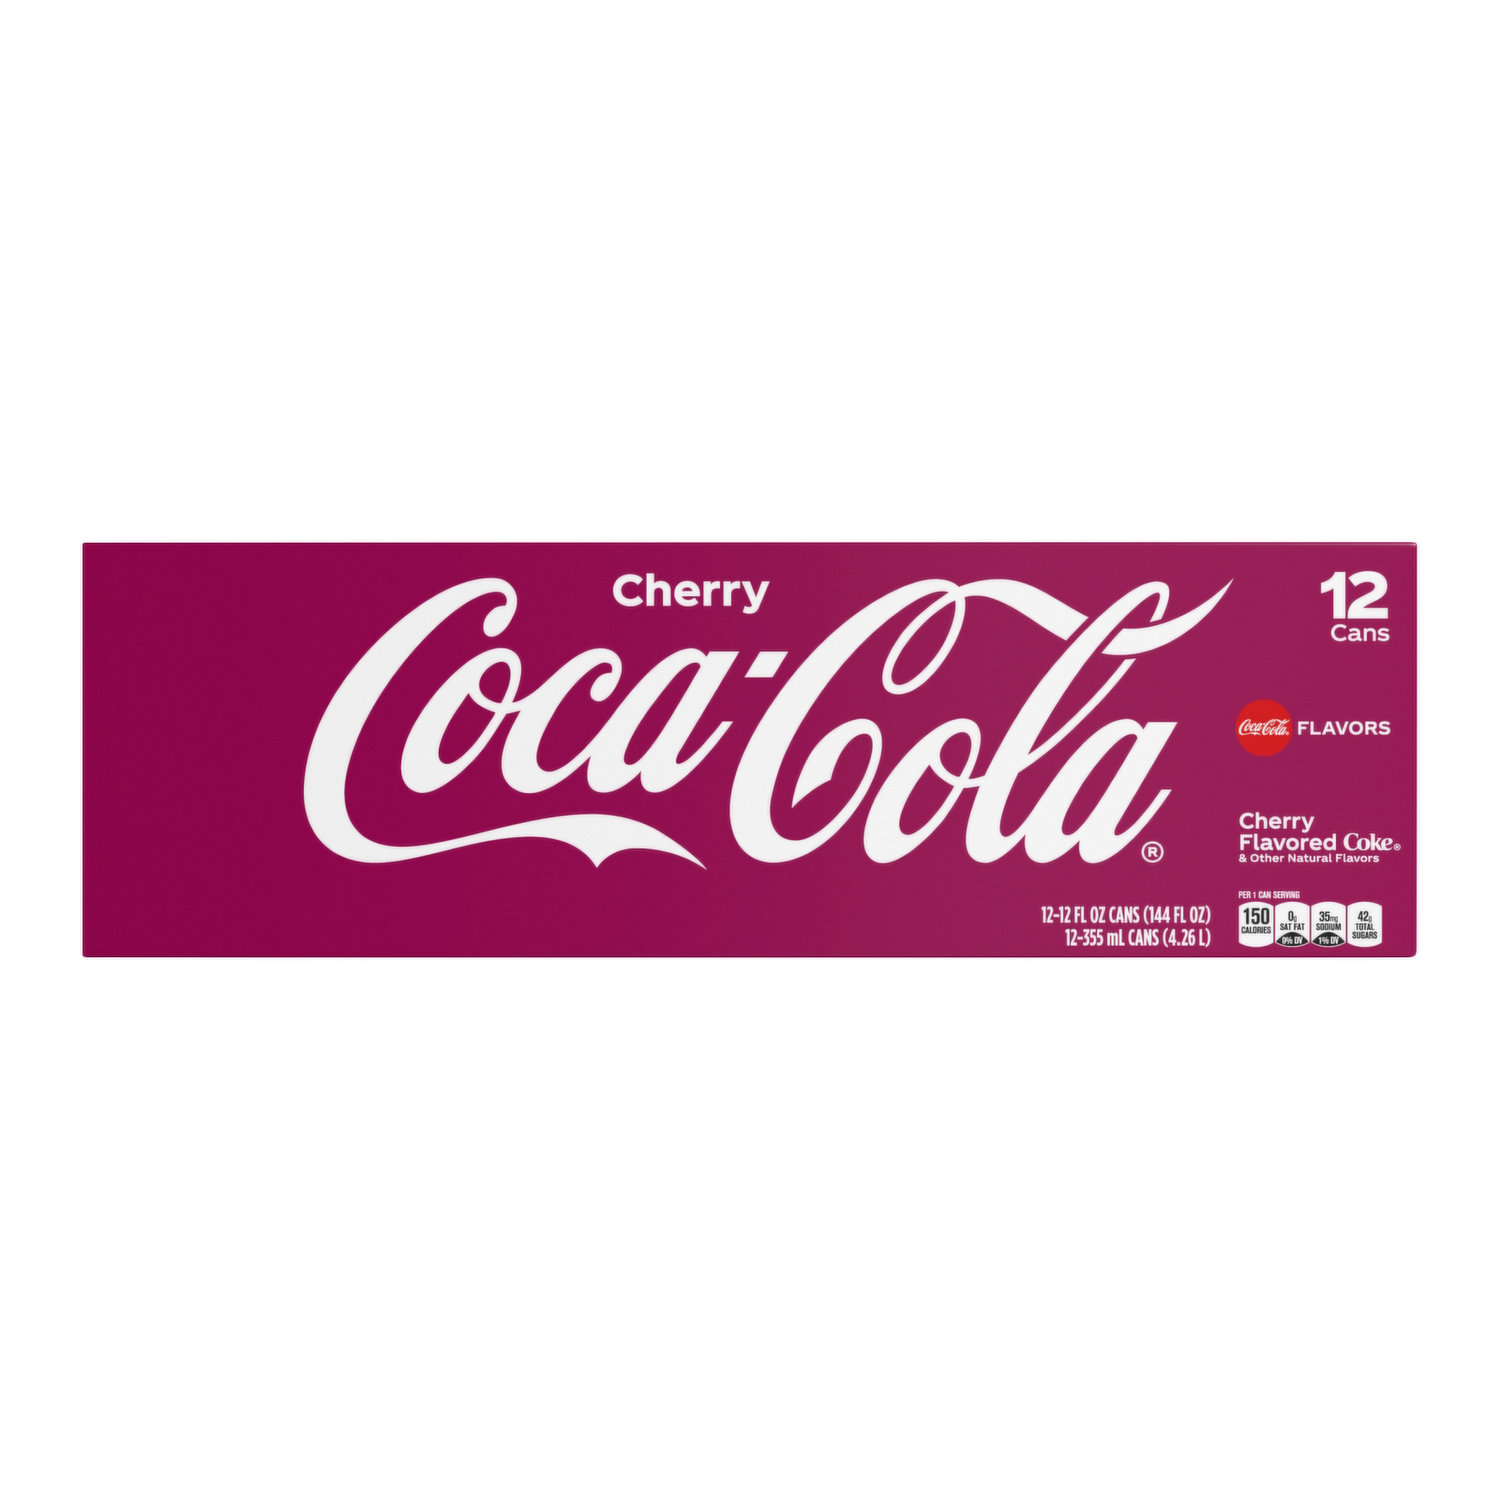 Cherry Coca-Cola, Cans (Pack of 12)